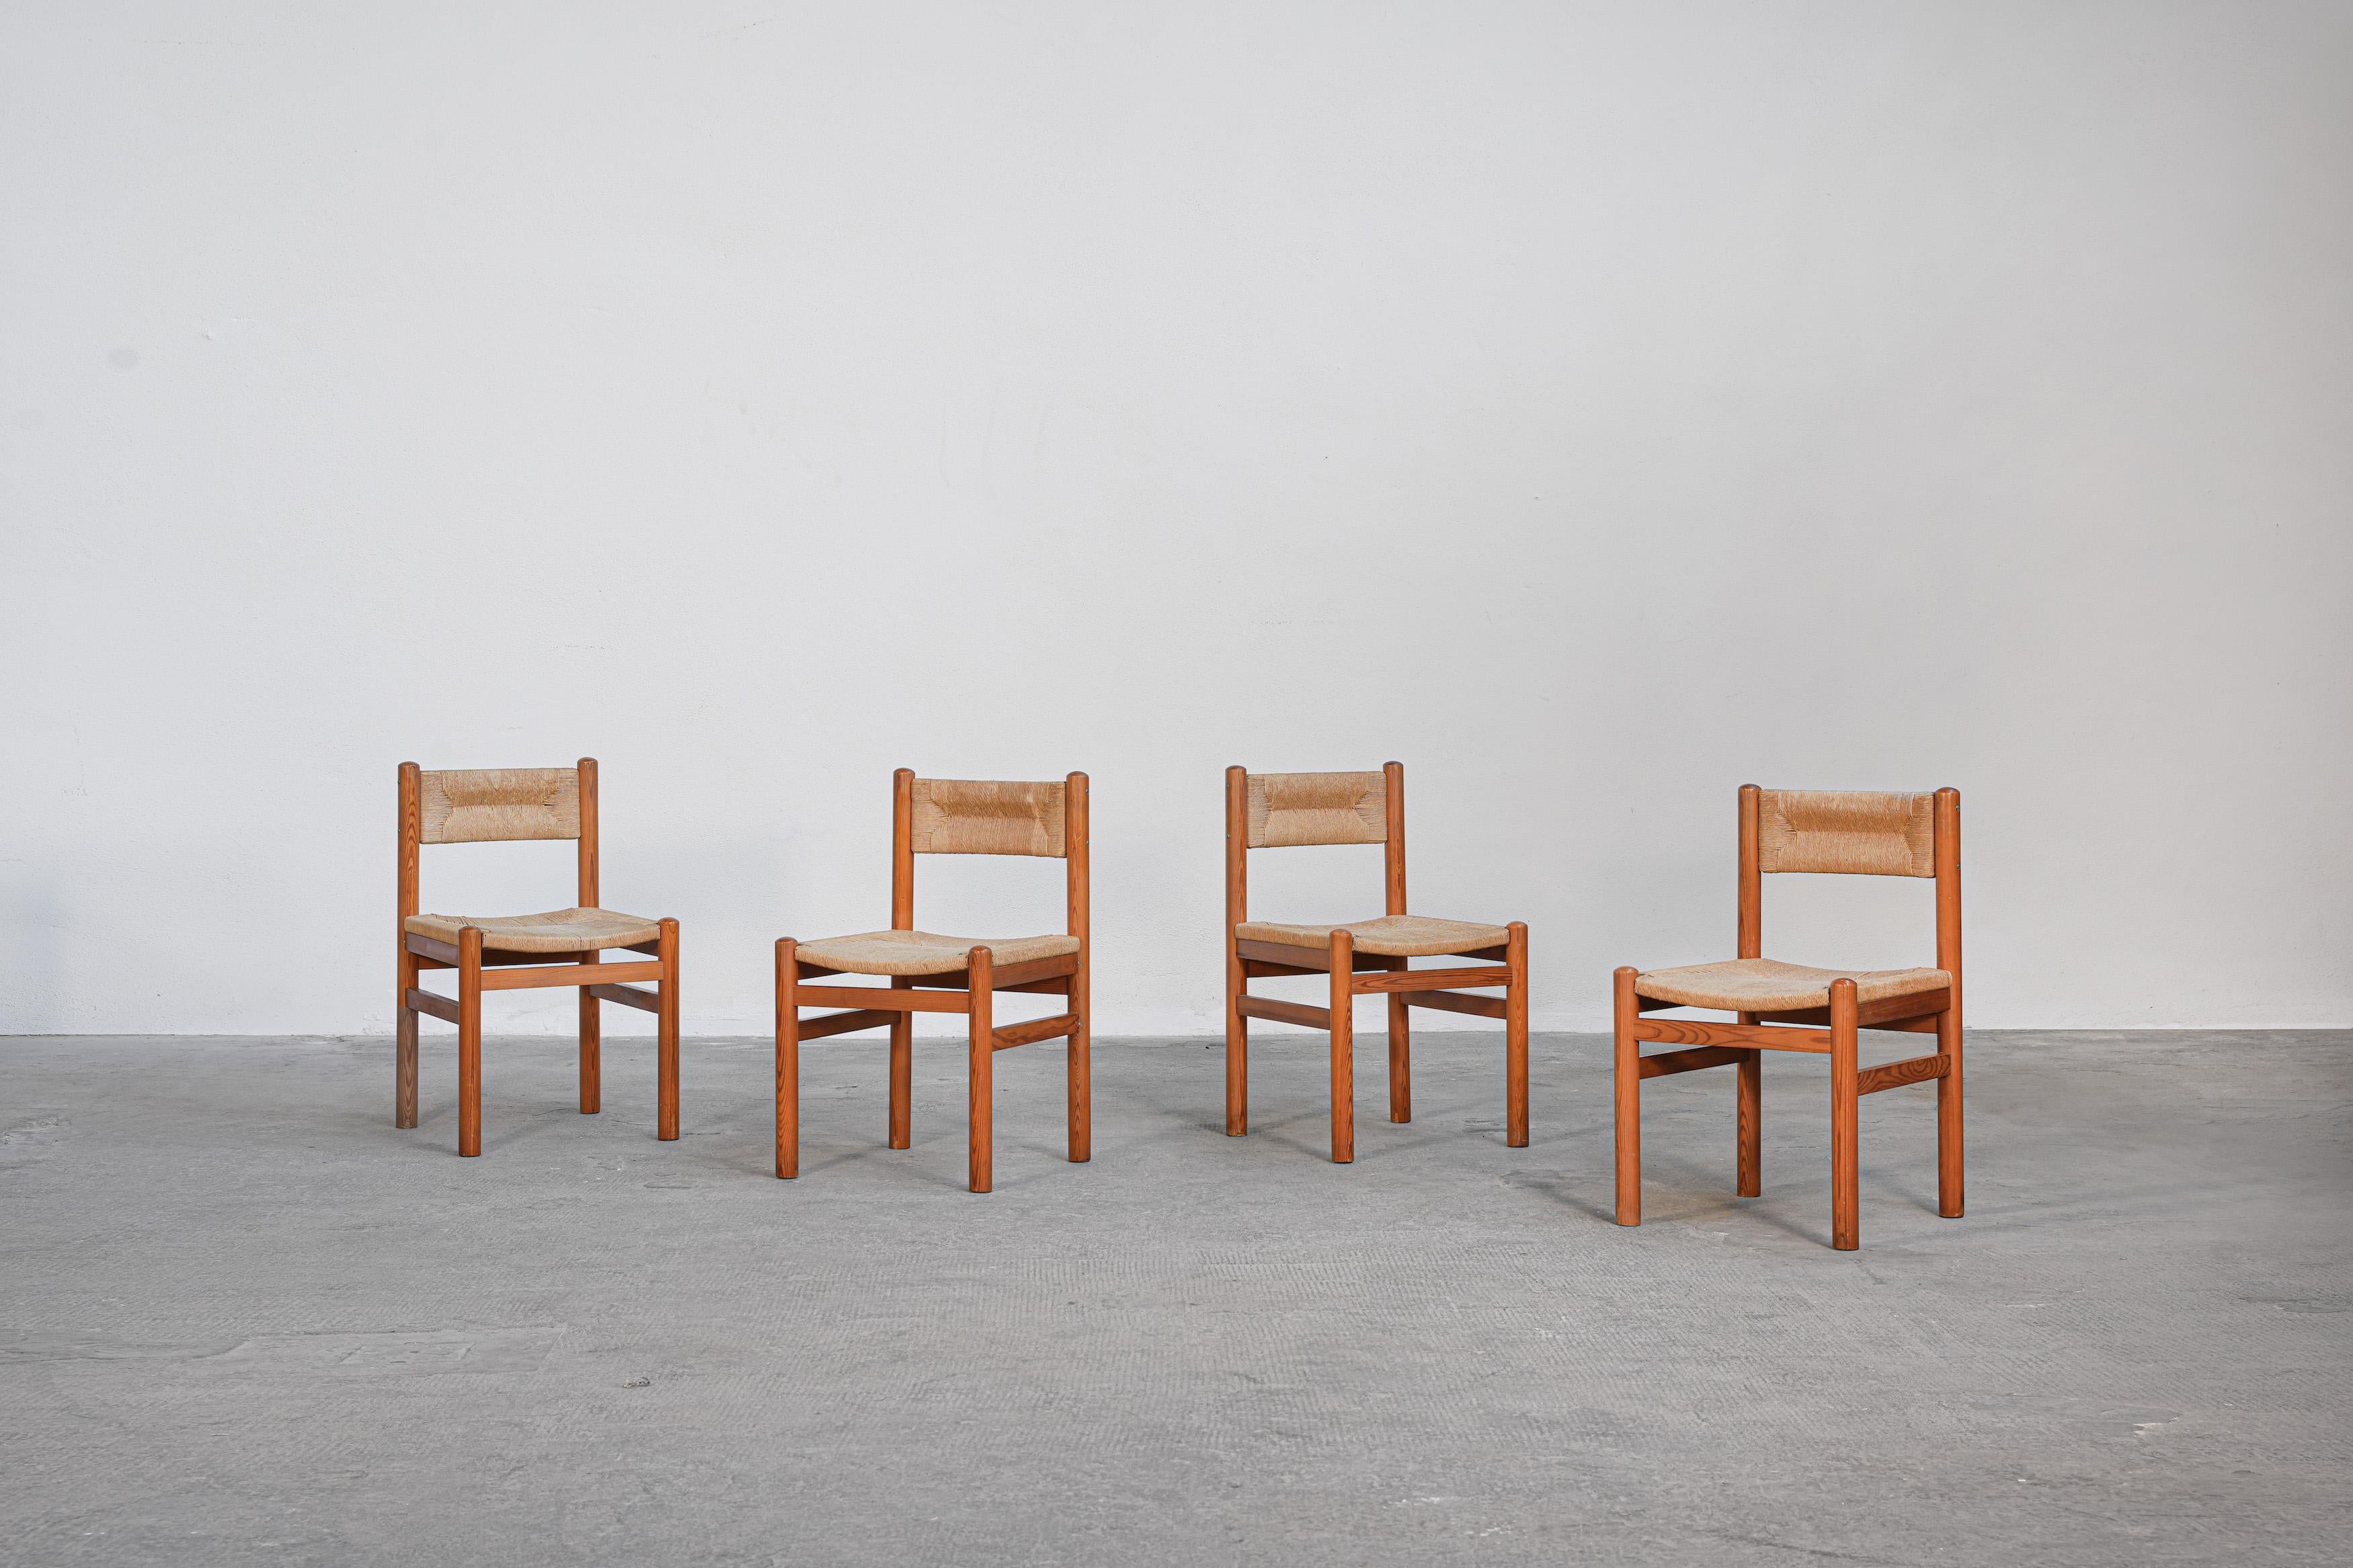 Set of 4 beautiful dining chairs in pine and paper cord, made in Denmark and produced in the 1960ies.
All chairs come in very good original condition and are ready for usage.

We offer worldwide shipping.

